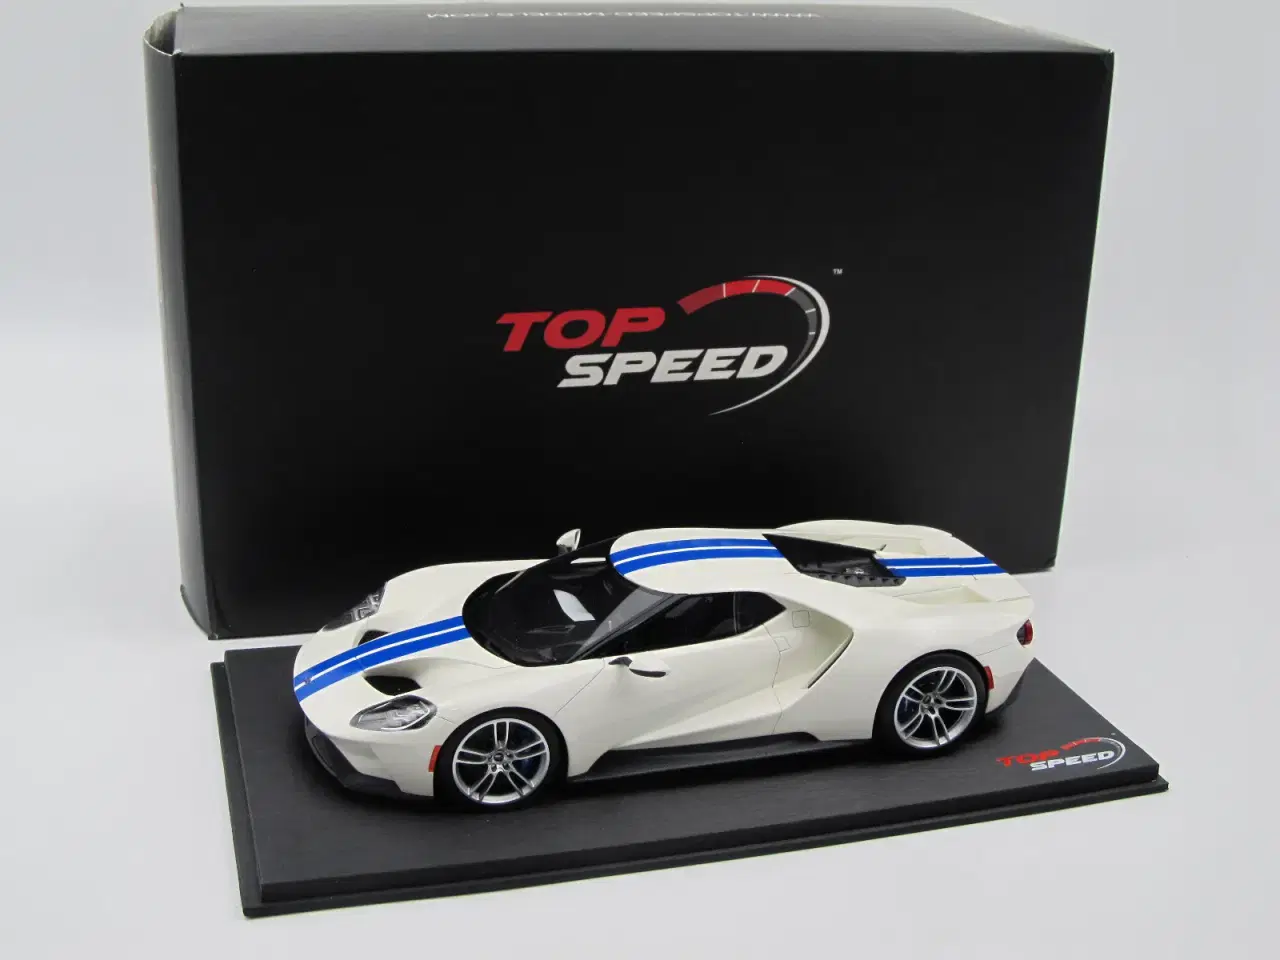 Billede 1 - 2016 Ford GT Shelby Limited Edition - 1:18